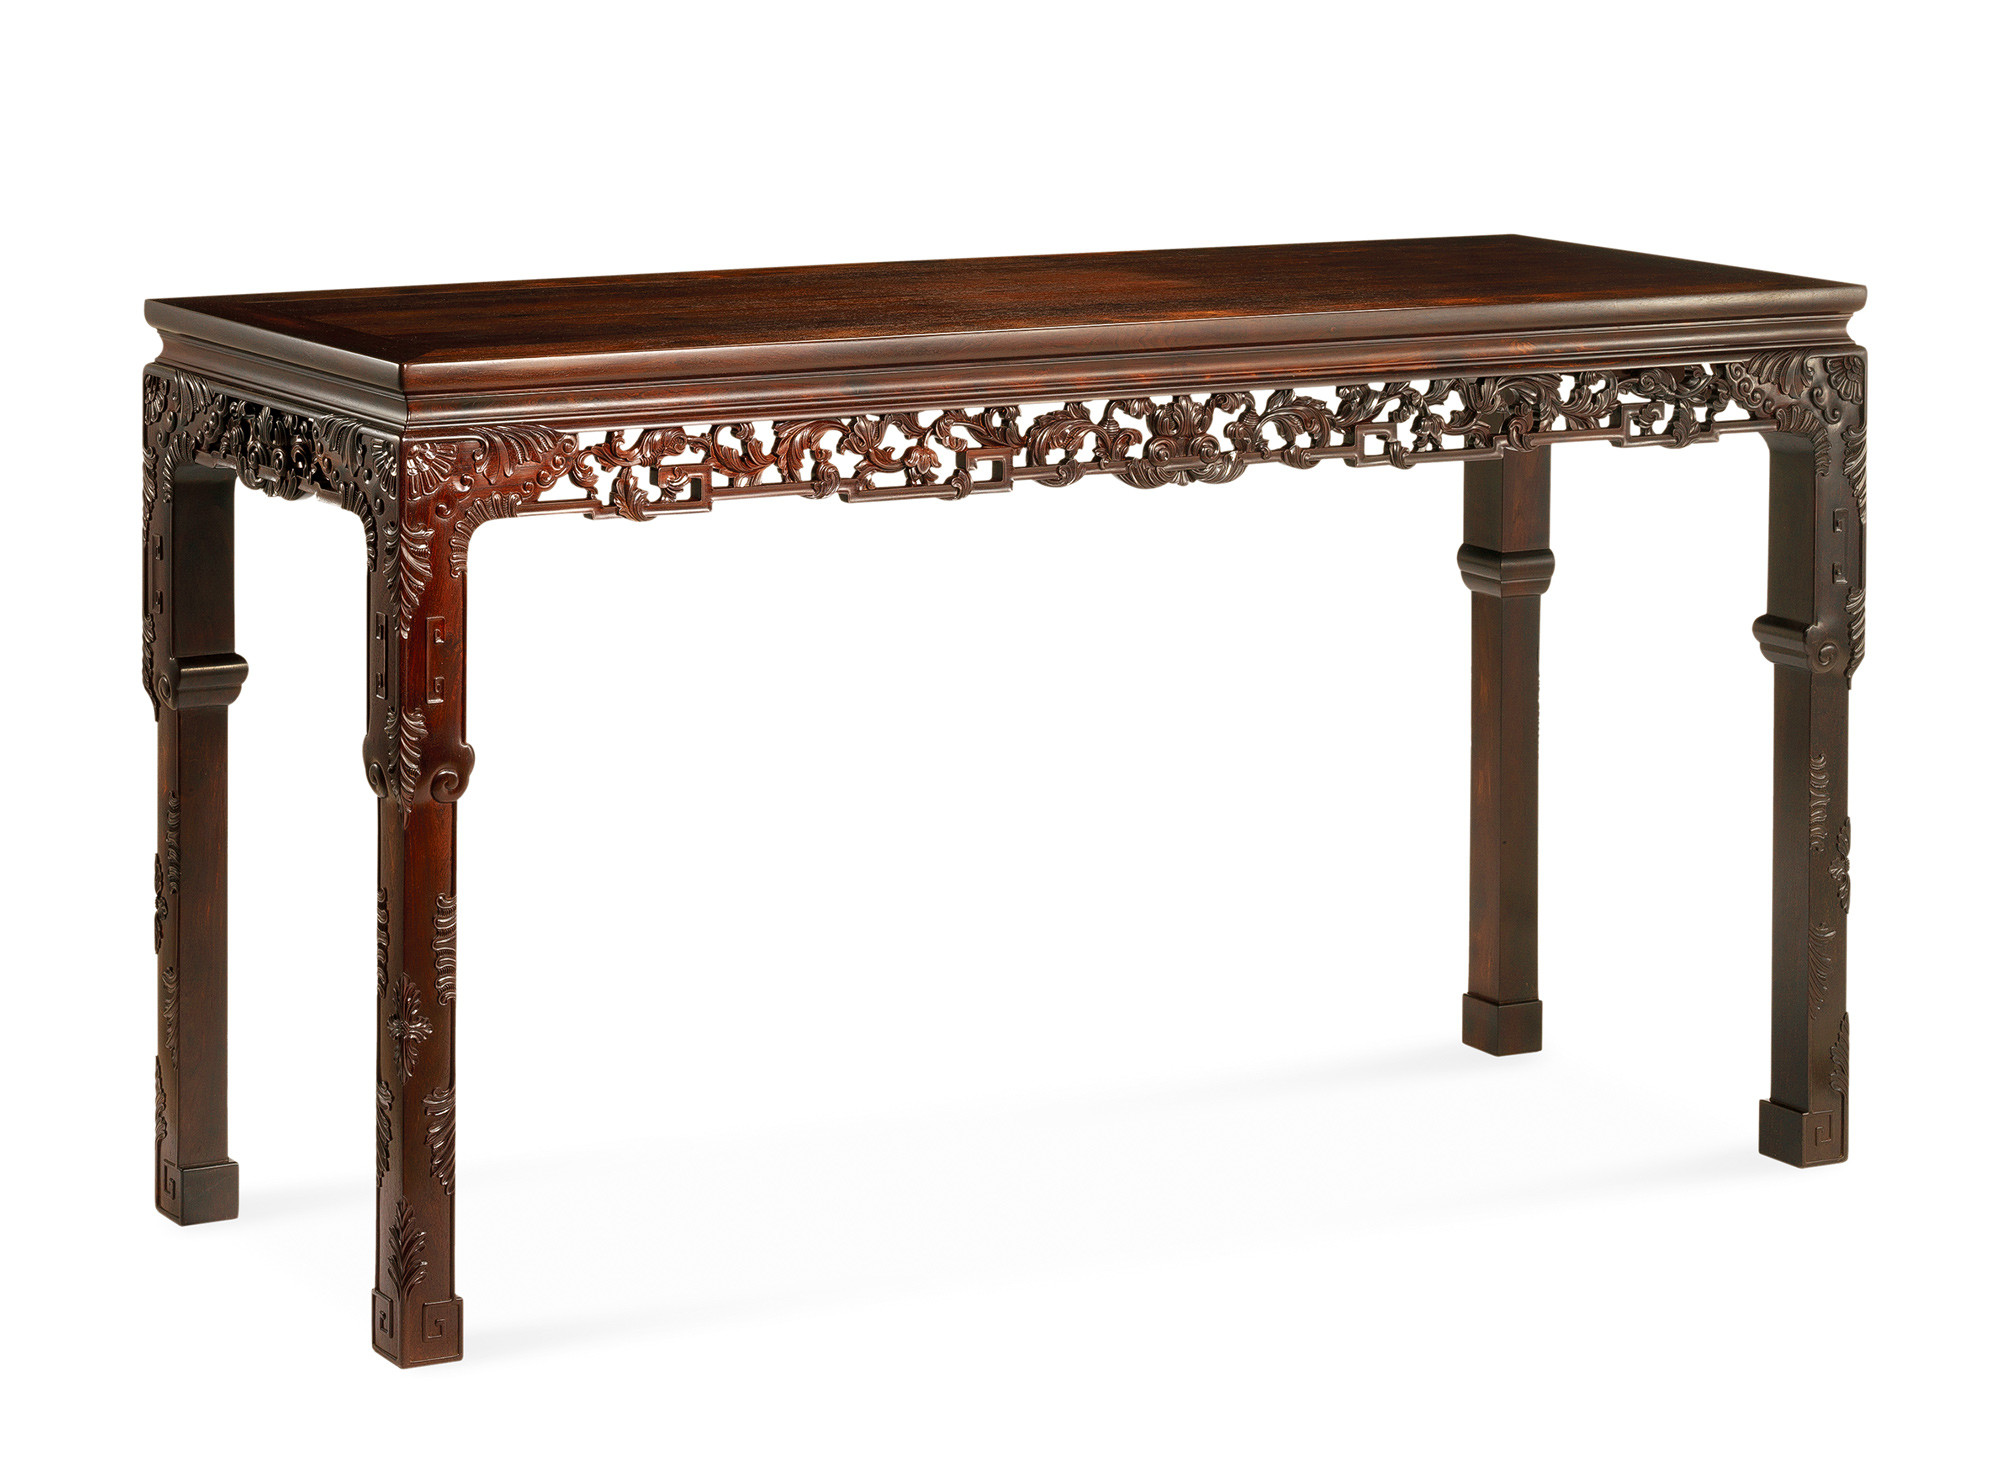 A ZITAN side table with cabriole legs and carved with western scrolling lotus